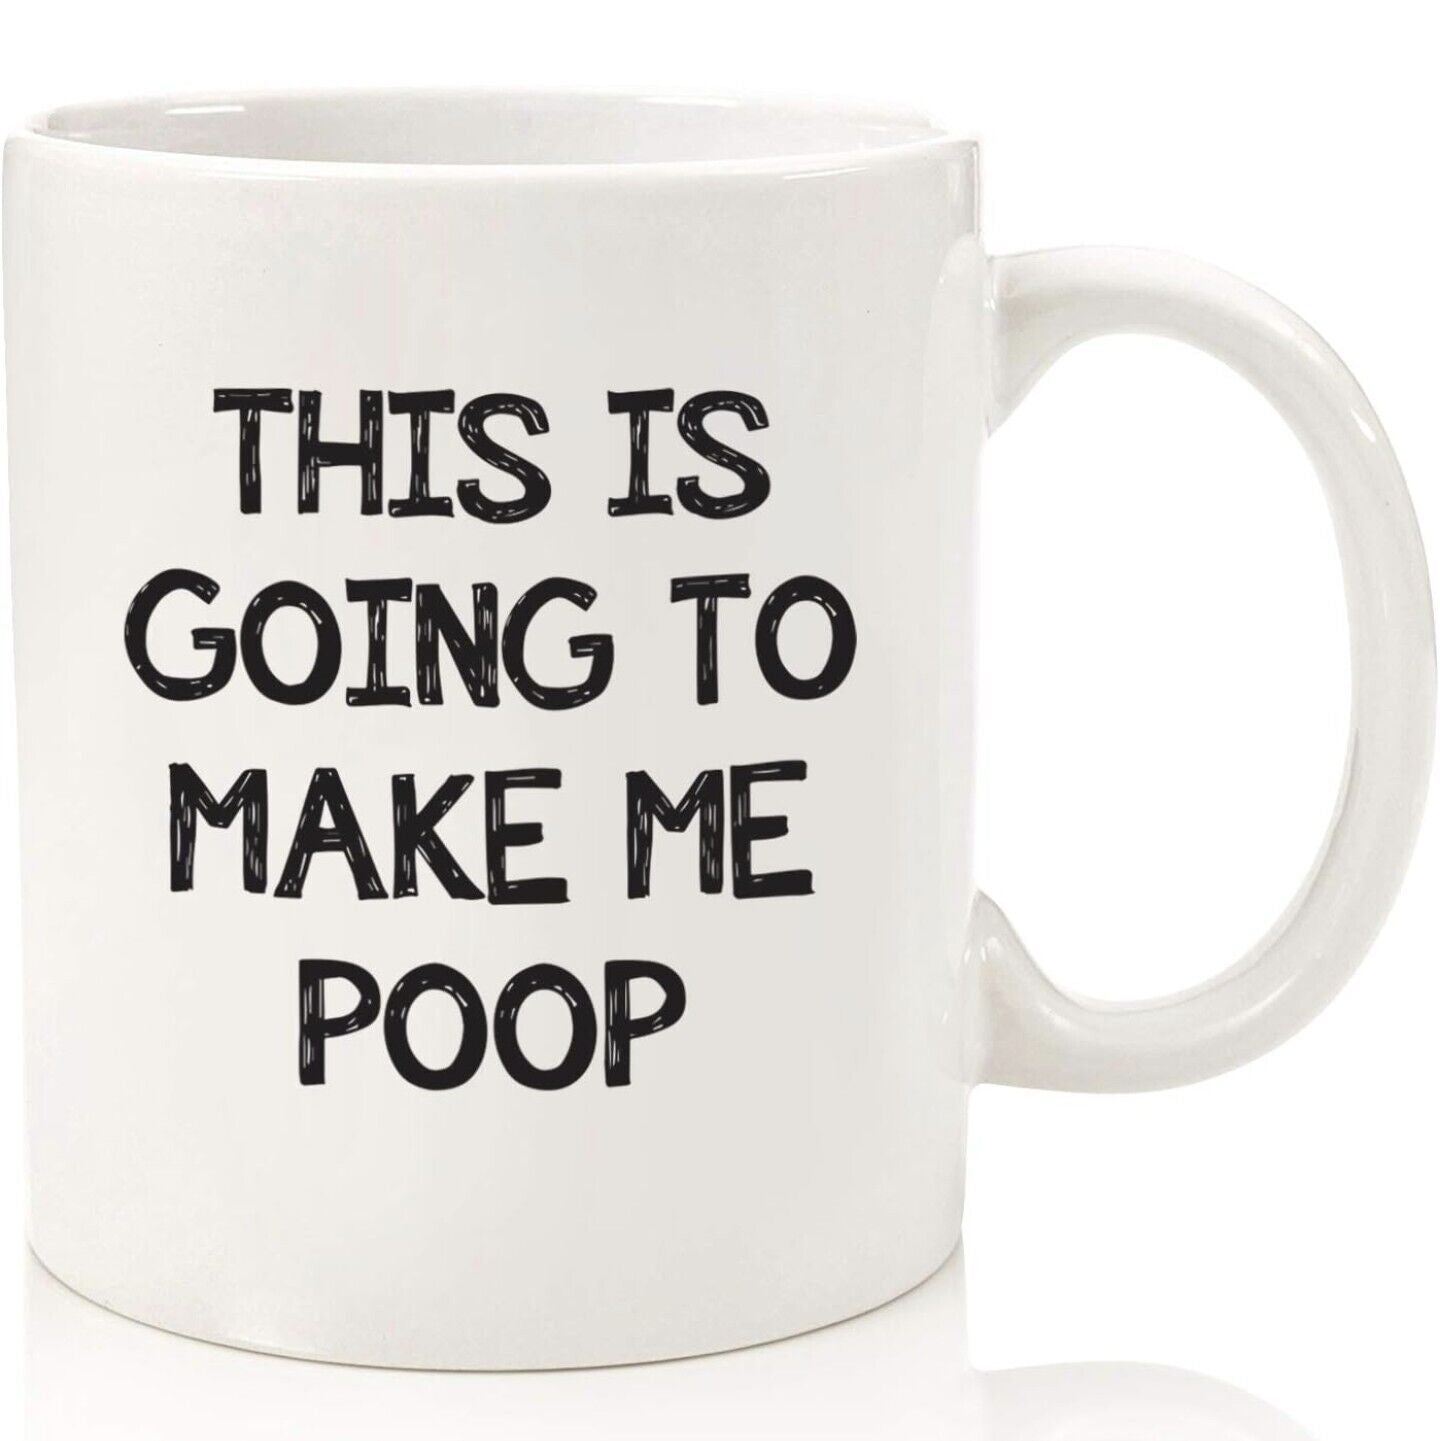 This Is Going To Make Me Poop - Funny Coffee Cup - 11oz or 15oz Mug